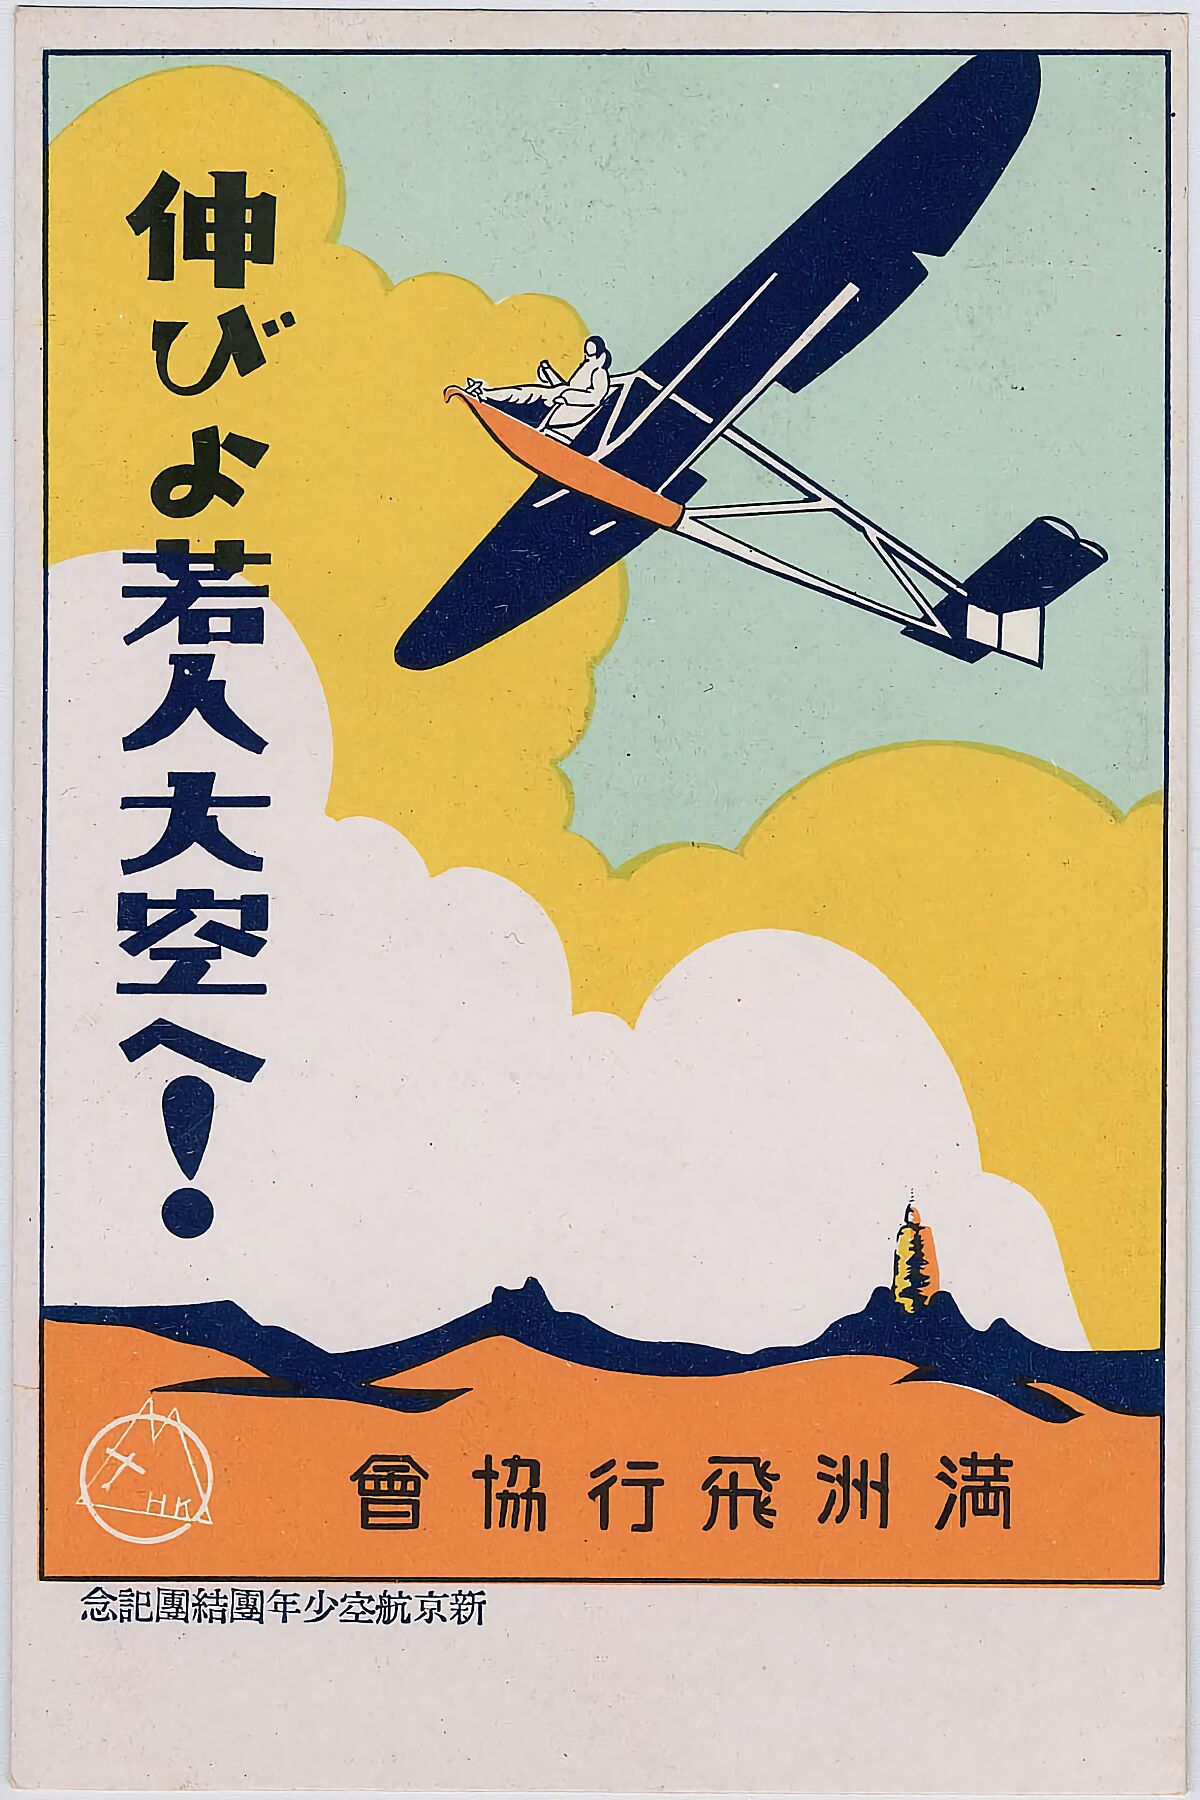 Commemorating the Formation of the Youth League of Shinkyo Airlines Artist unknown, Japanese Publisher_ Manchuria Airline Association (Manshu hiko kyokai) Japanese Early Shôwa era